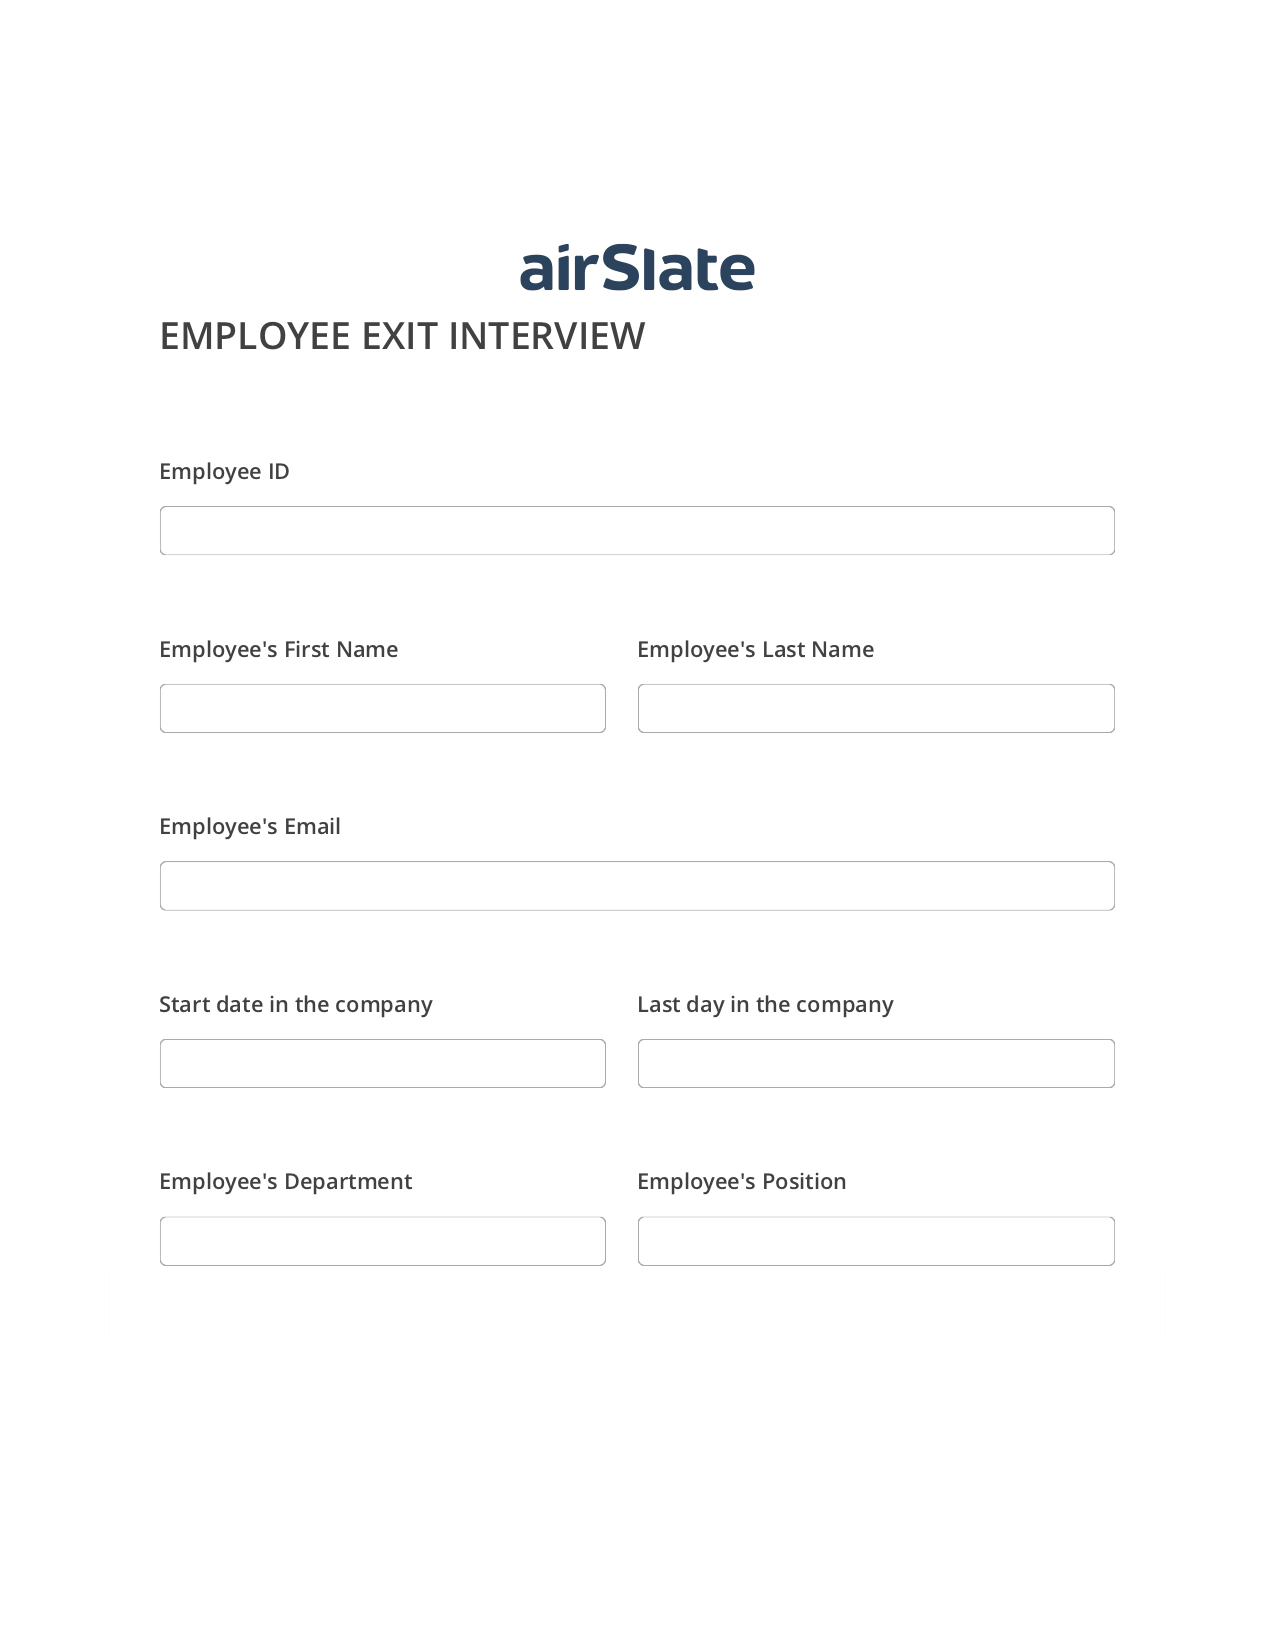 Employee Exit Interview Flow Pre-fill from Smartsheet Bot for San Jose